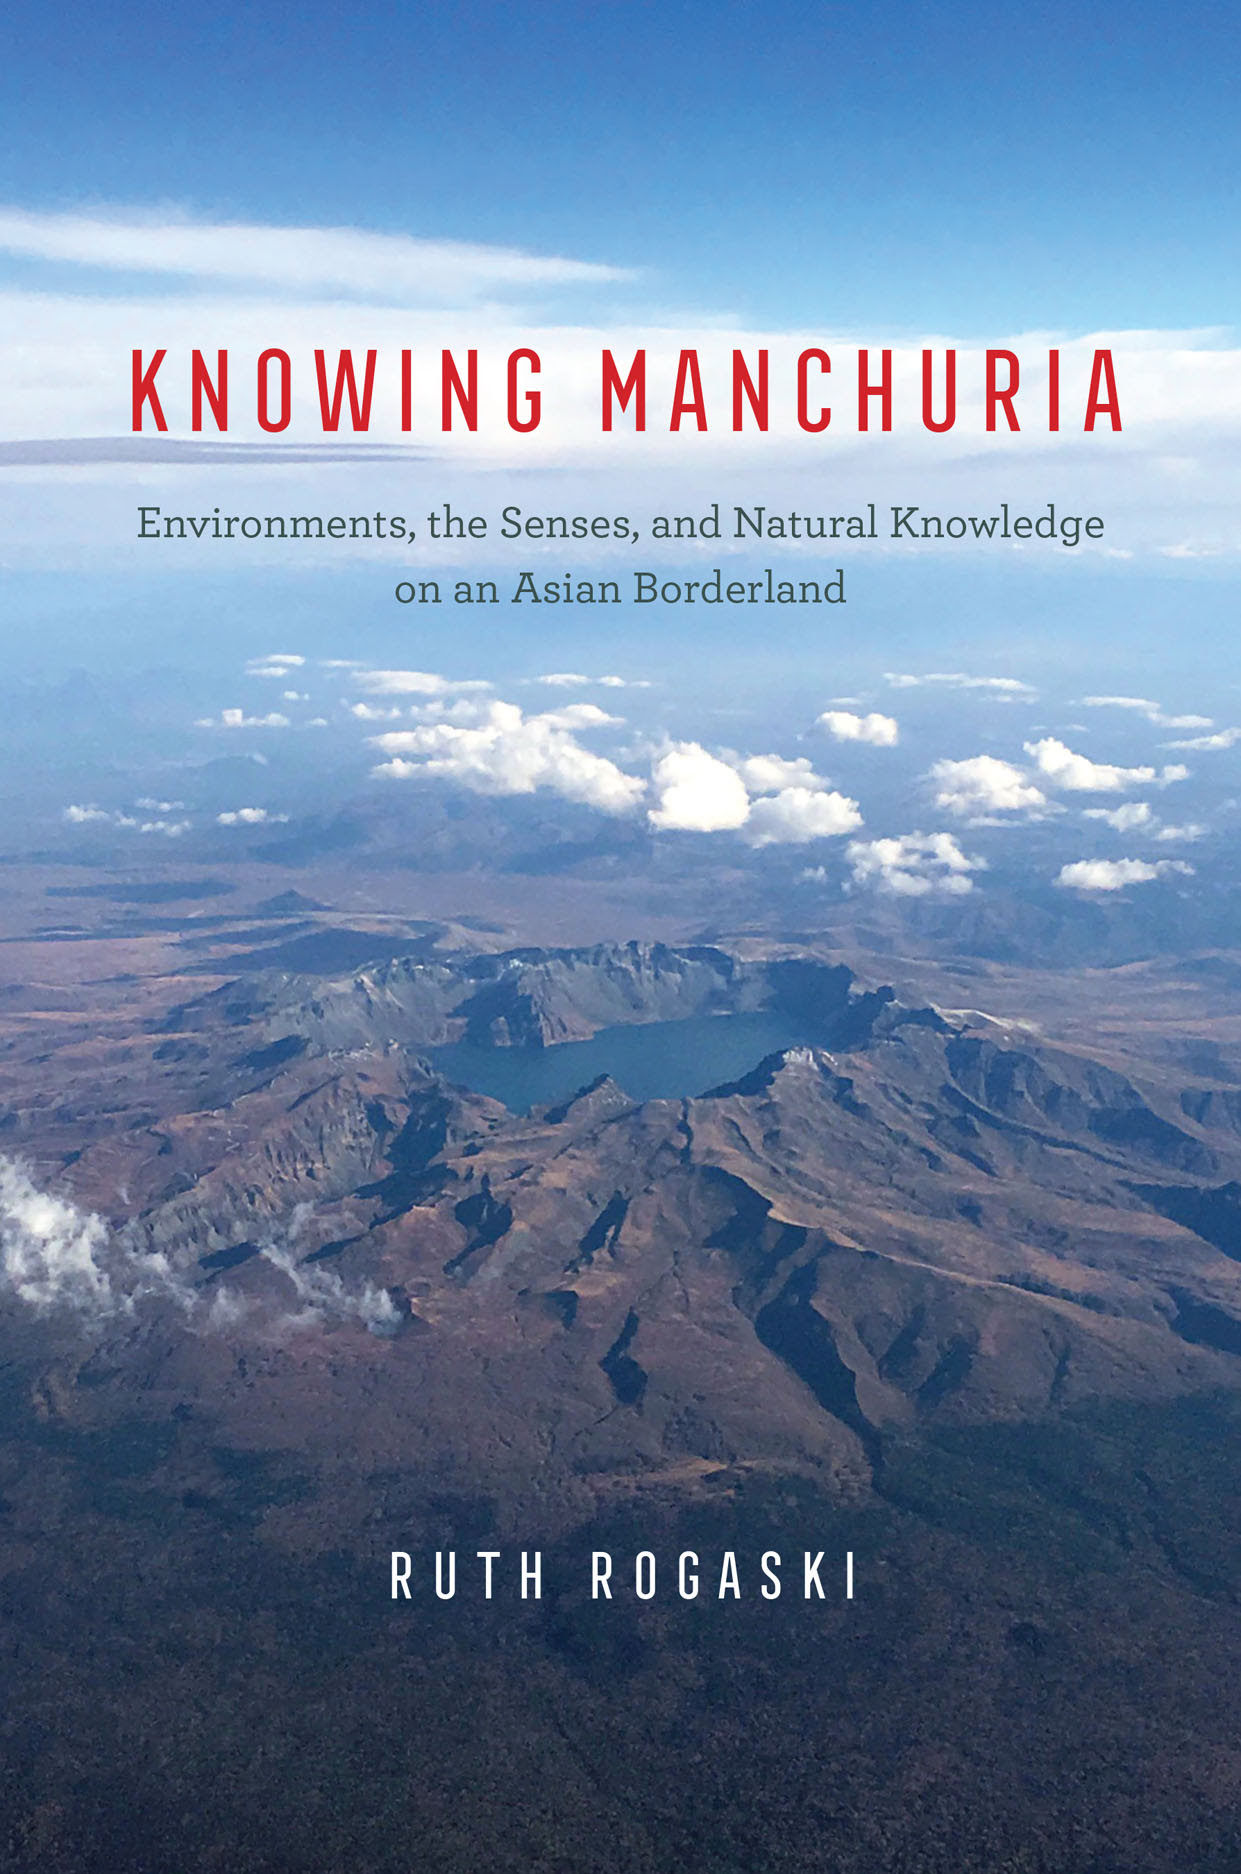 Knowing Manchuria: Environments, the Senses, and Natural Knowledge on an Asian Borderland in Kindle/PDF/EPUB